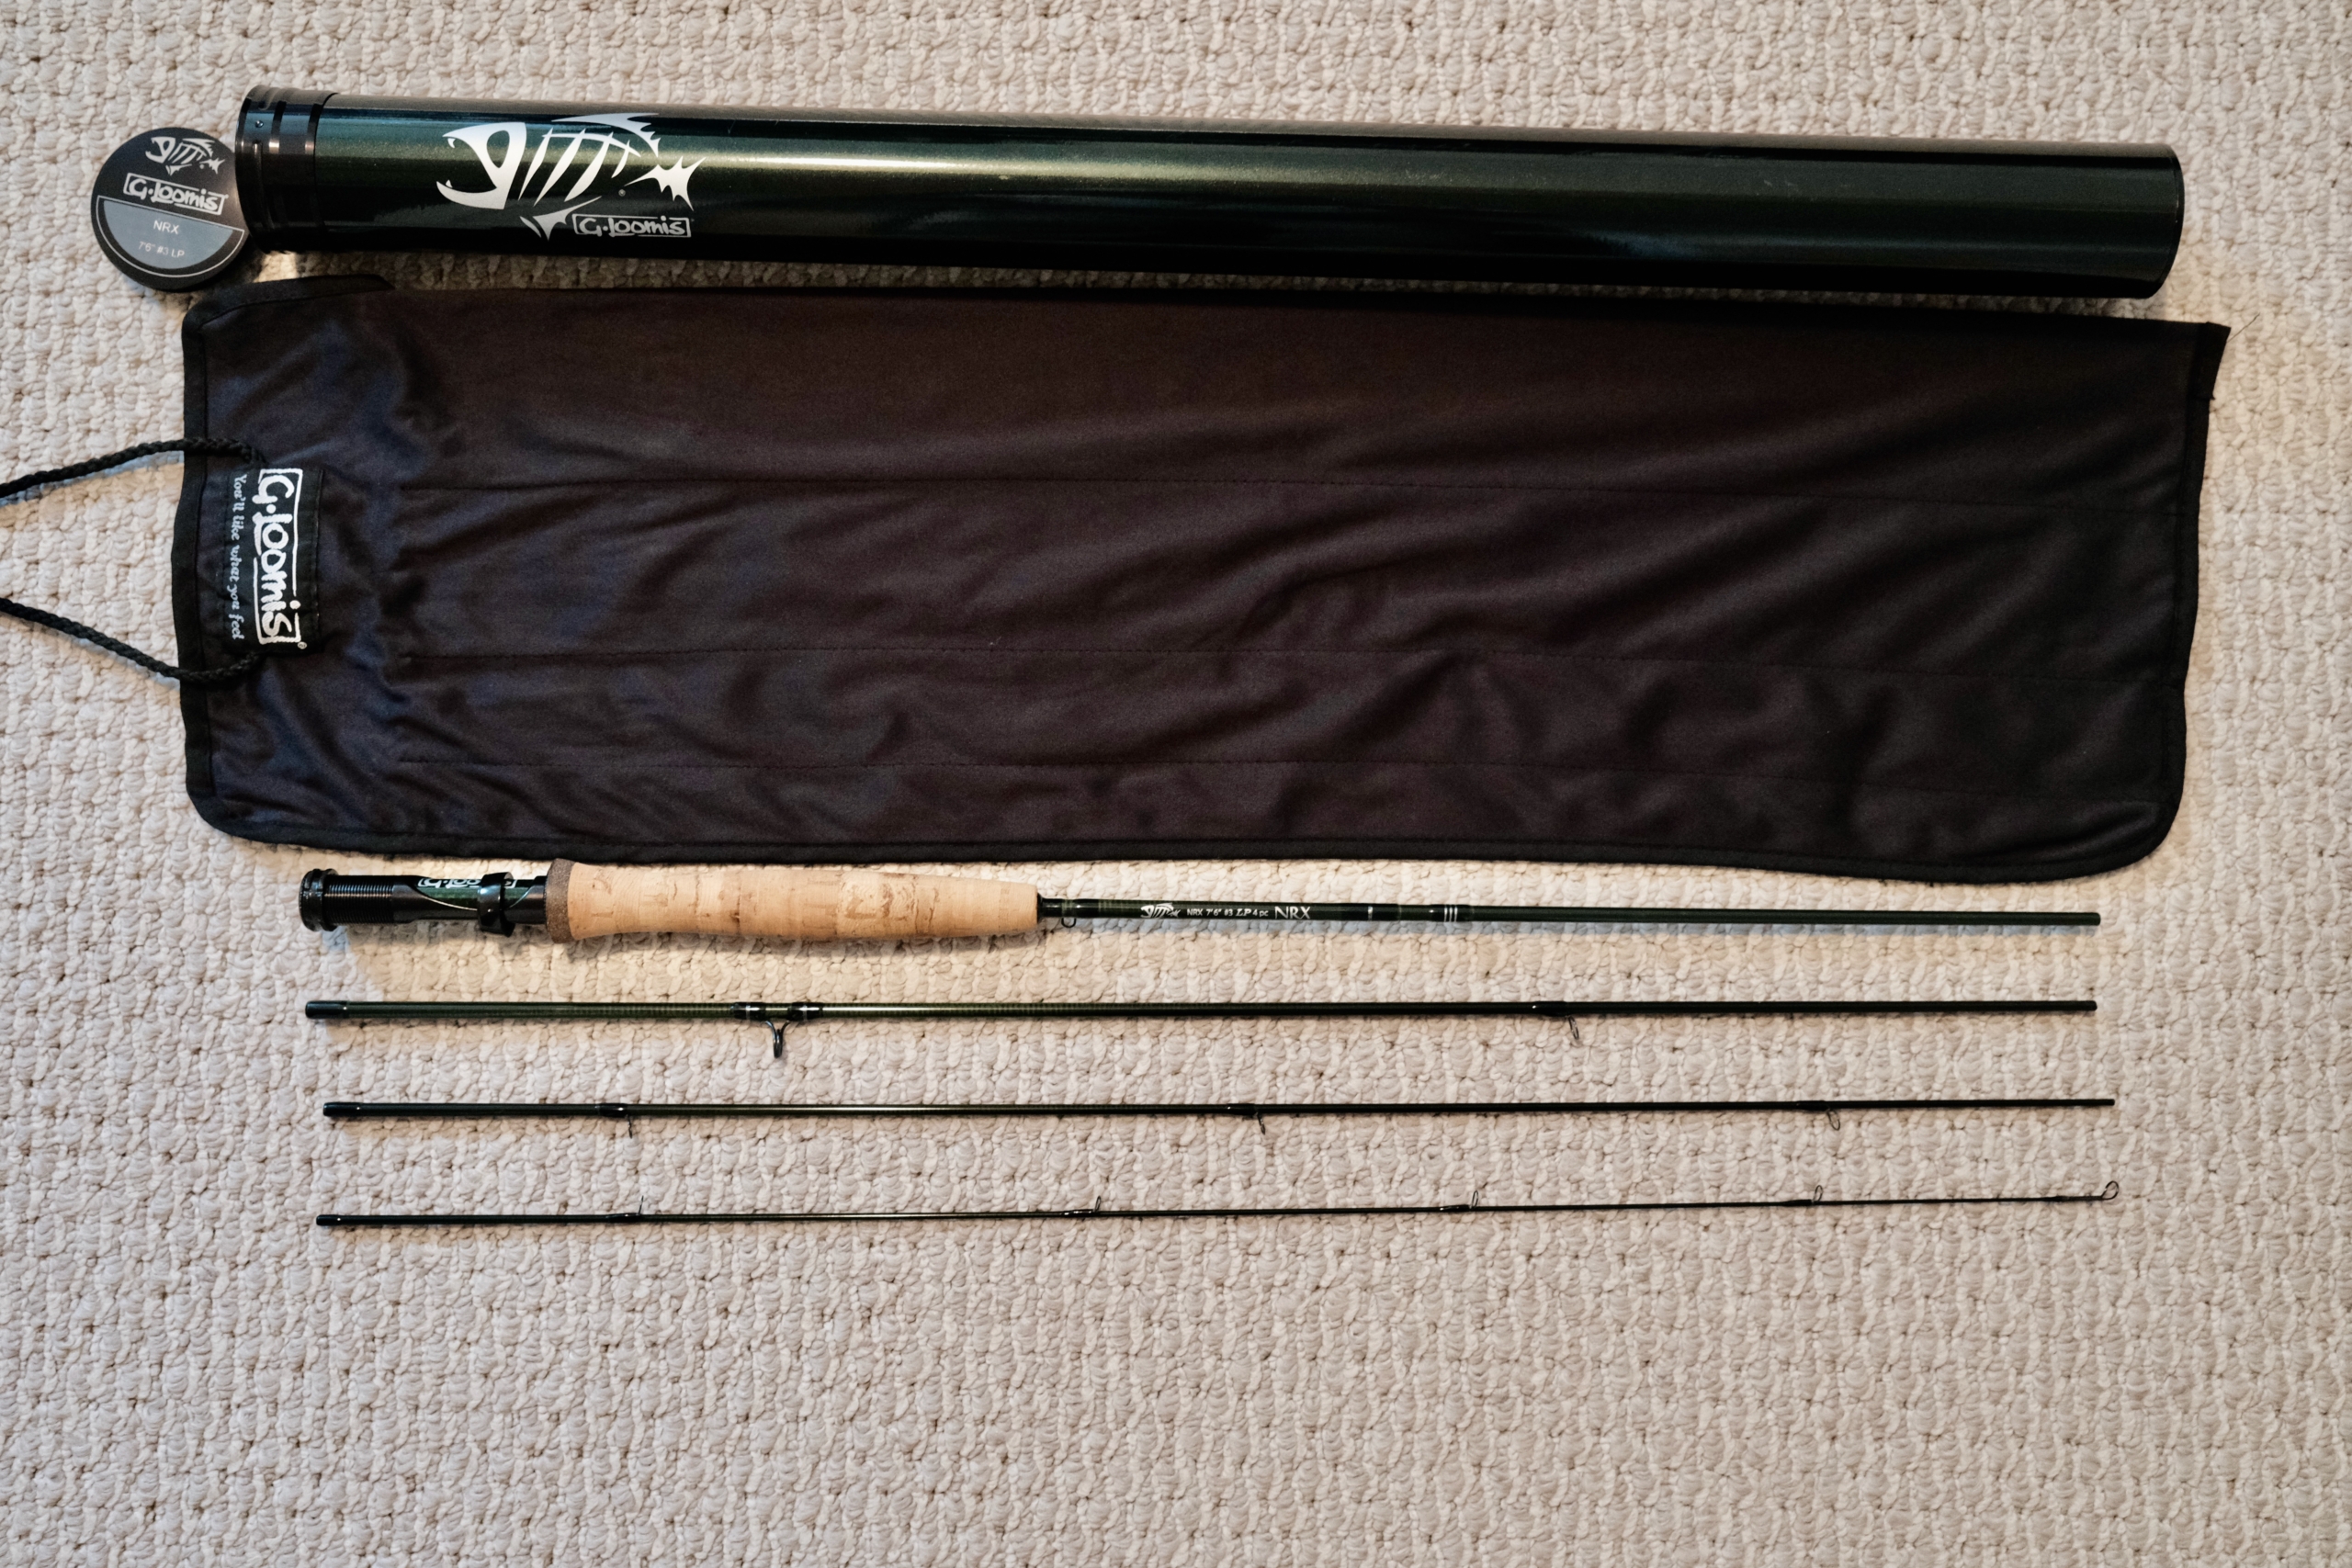 SOLD! – NEW PRICE! – NRX – LP – 7'6” – 3 Wt – 4PC – Fly Rod